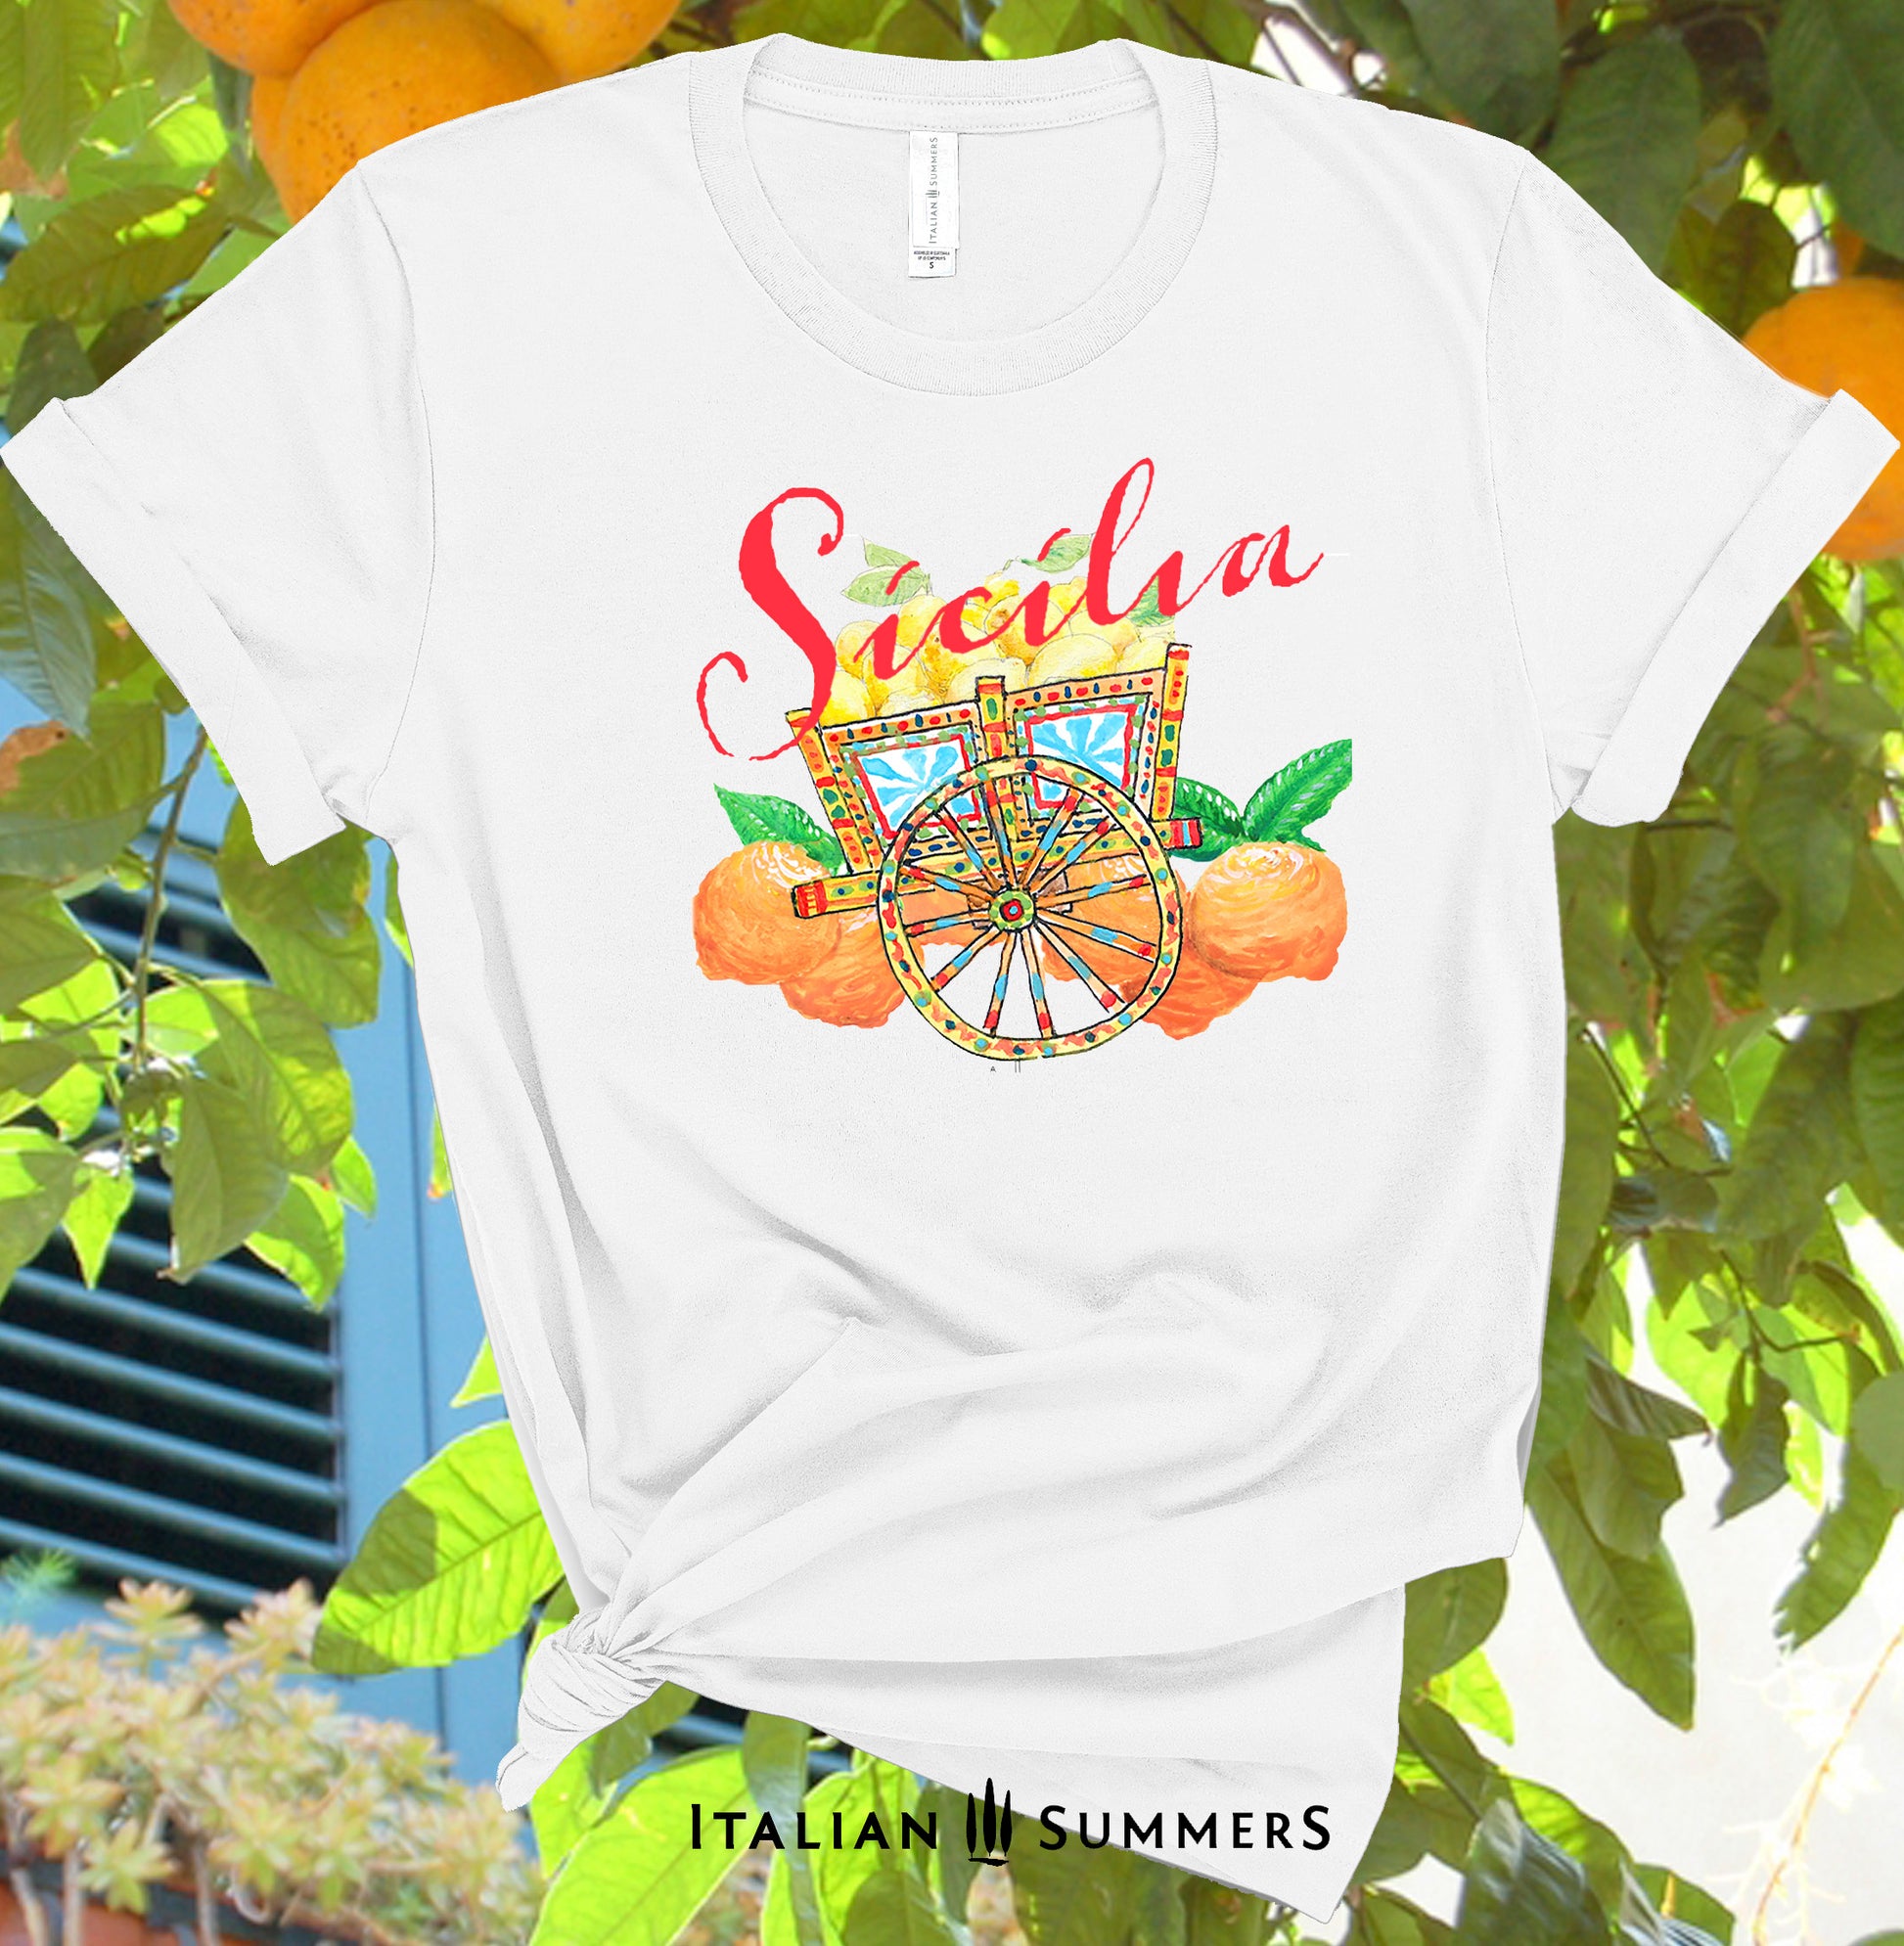 Italy Inspired White or Navy T shirt with hand-painted design of a colorful Sicilian cart , Sicilian oranges and lemons. The word 'Sicilia' is printed in red over the composition. Italy gift, designed by an Italian , made by Italian Summers